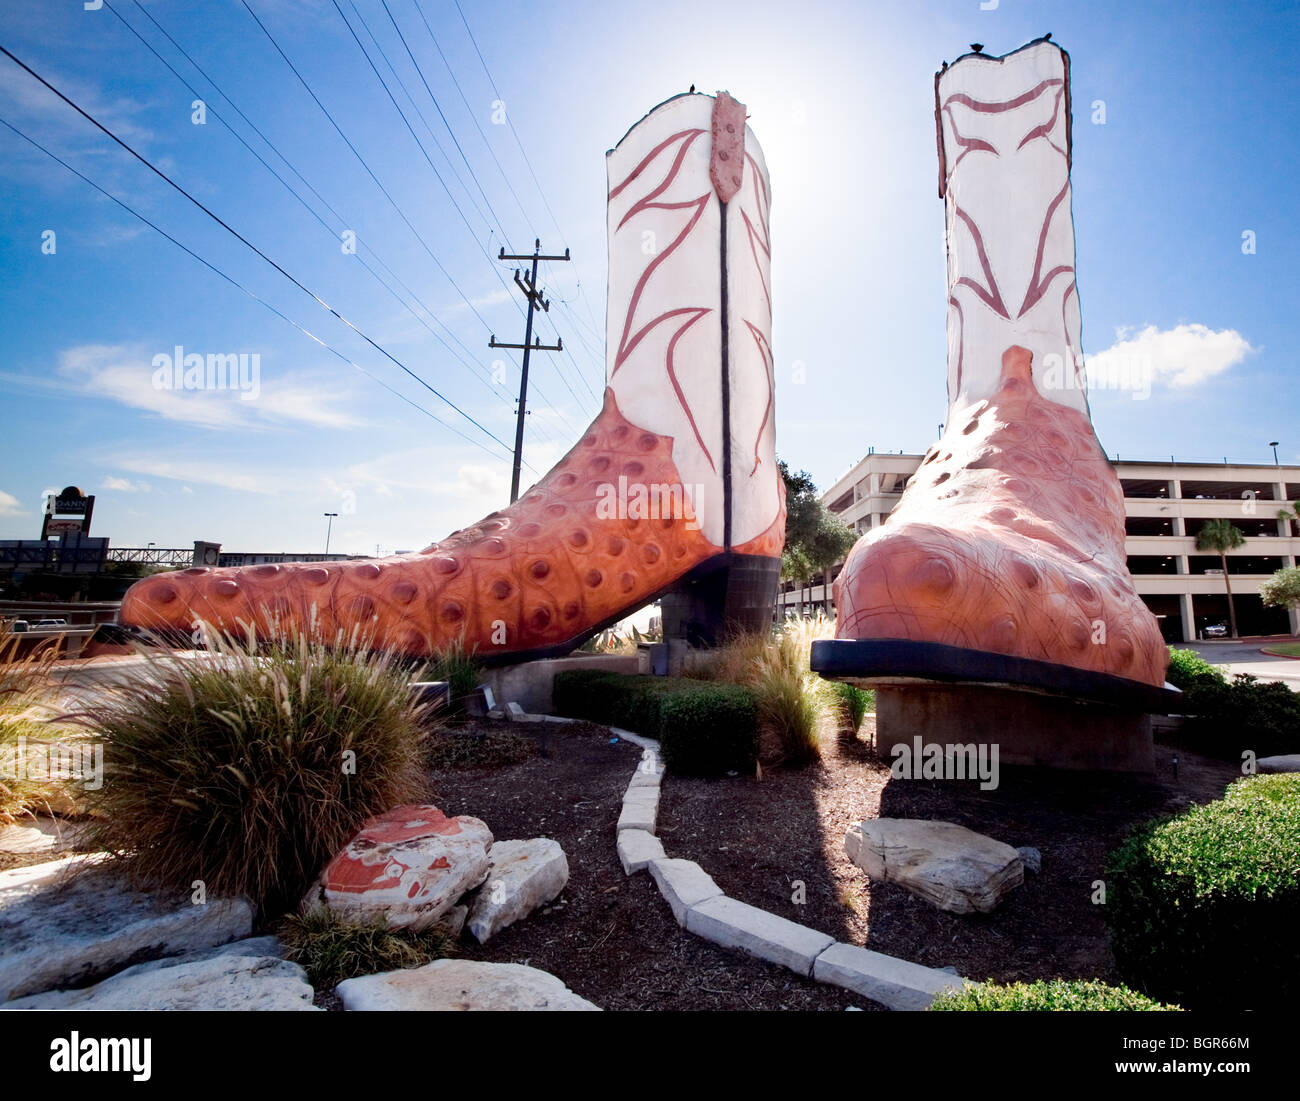 The giant cowboy boots at San Antonio's Northstar Mall Stock Photo - Alamy